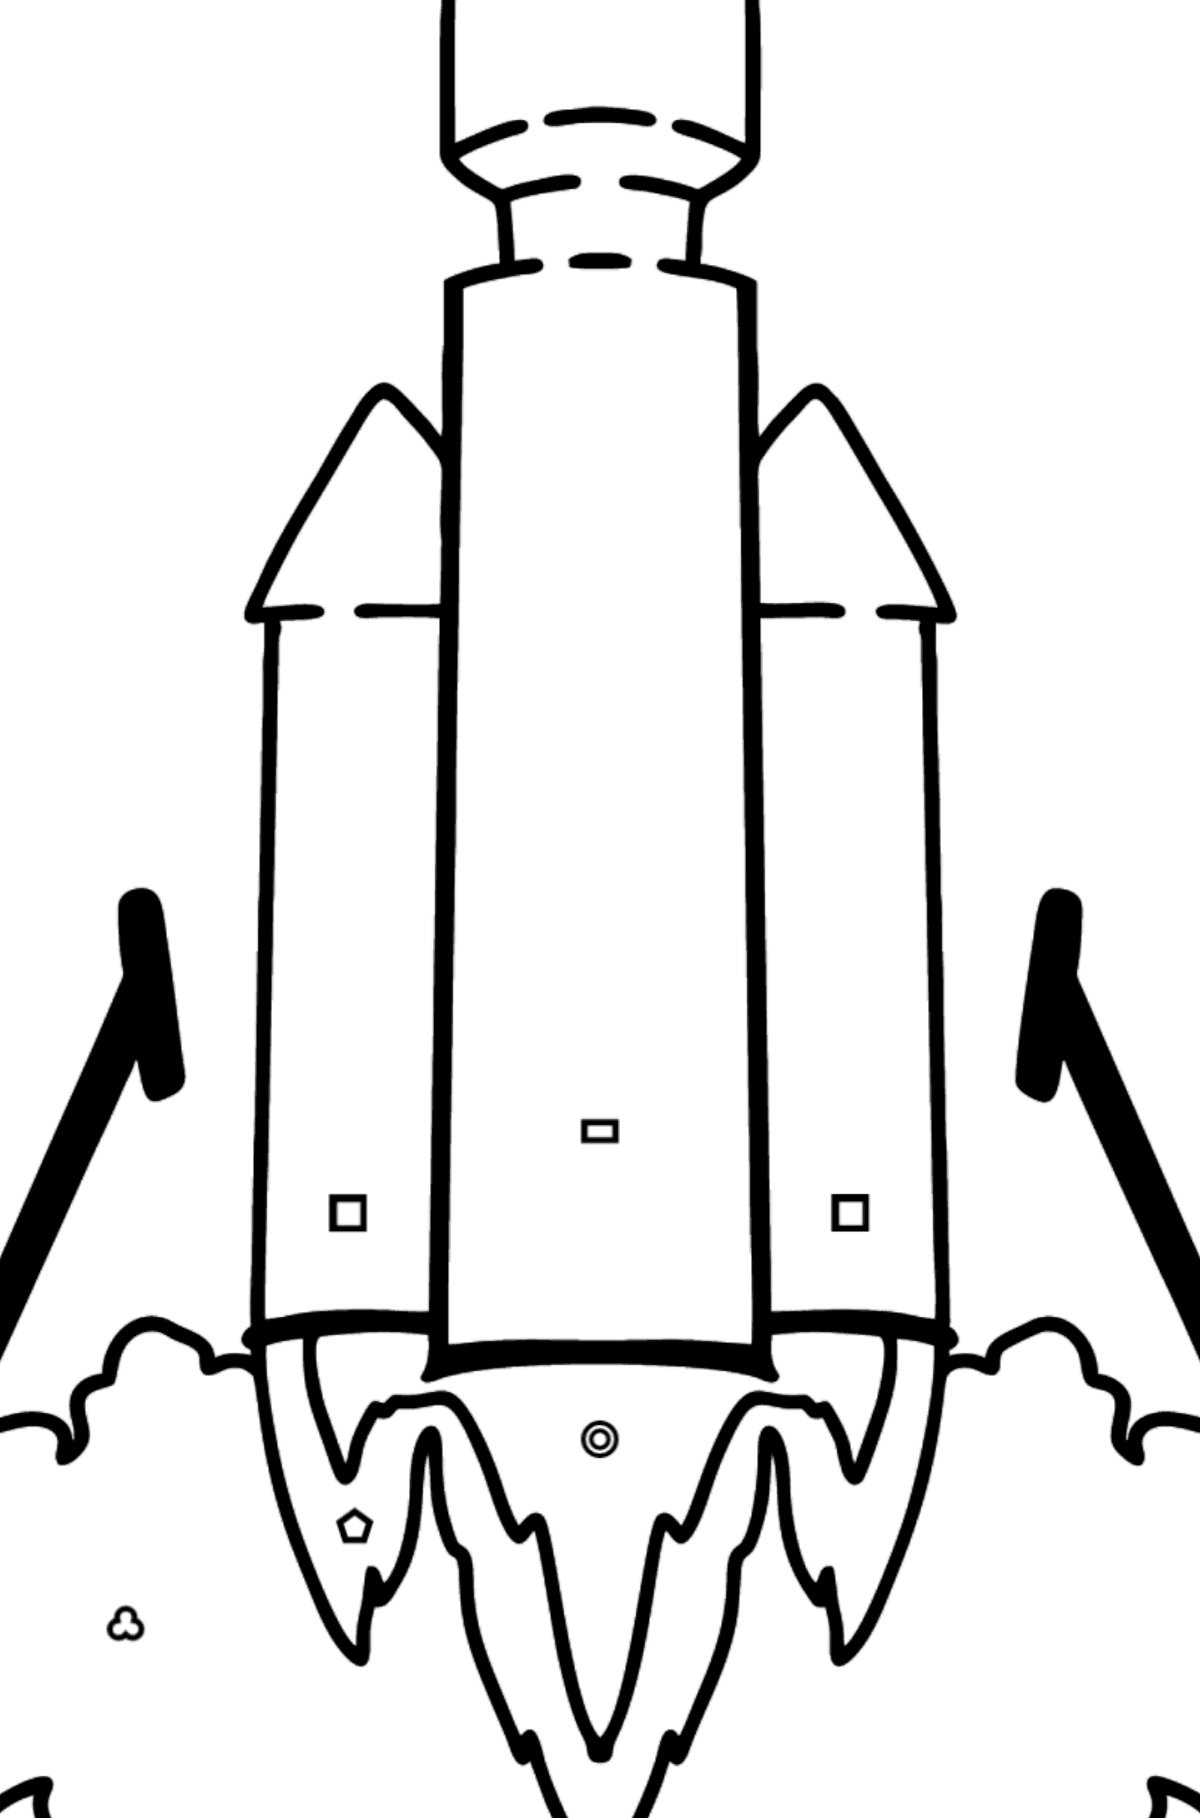 Rocket Launch coloring page - Coloring by Geometric Shapes for Kids